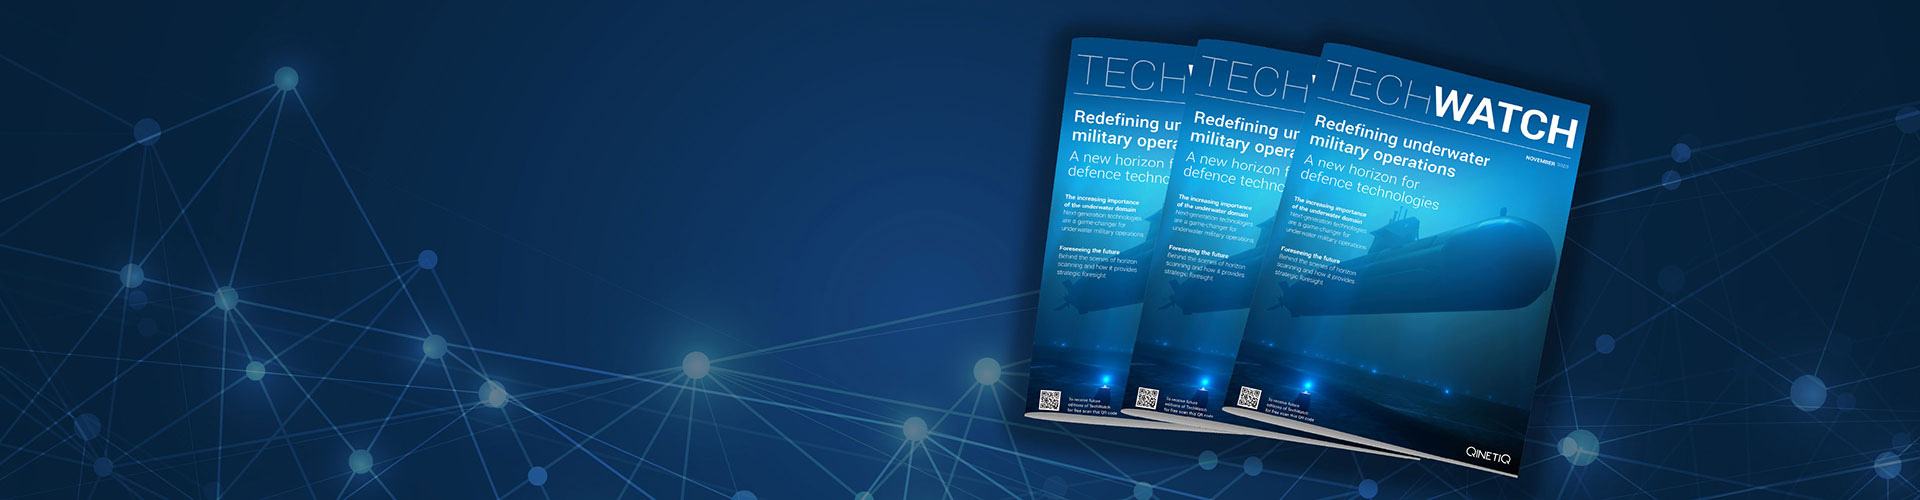 Graphic of TechWatch Edition 14 publication